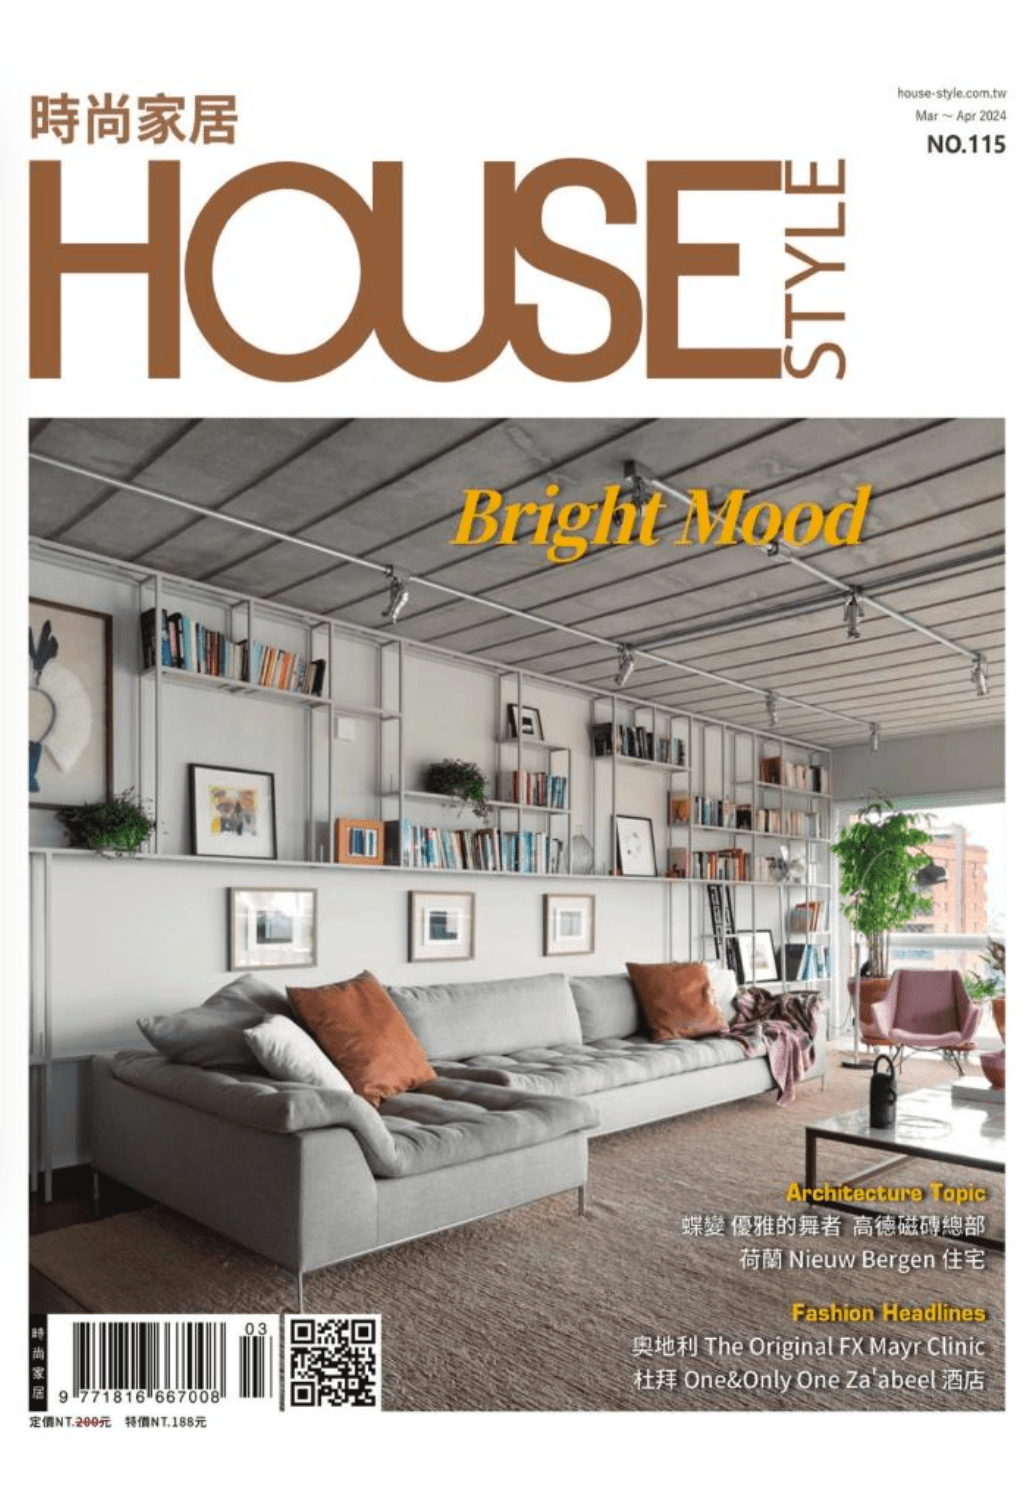 House Style Mar-Apr 2024 Issue